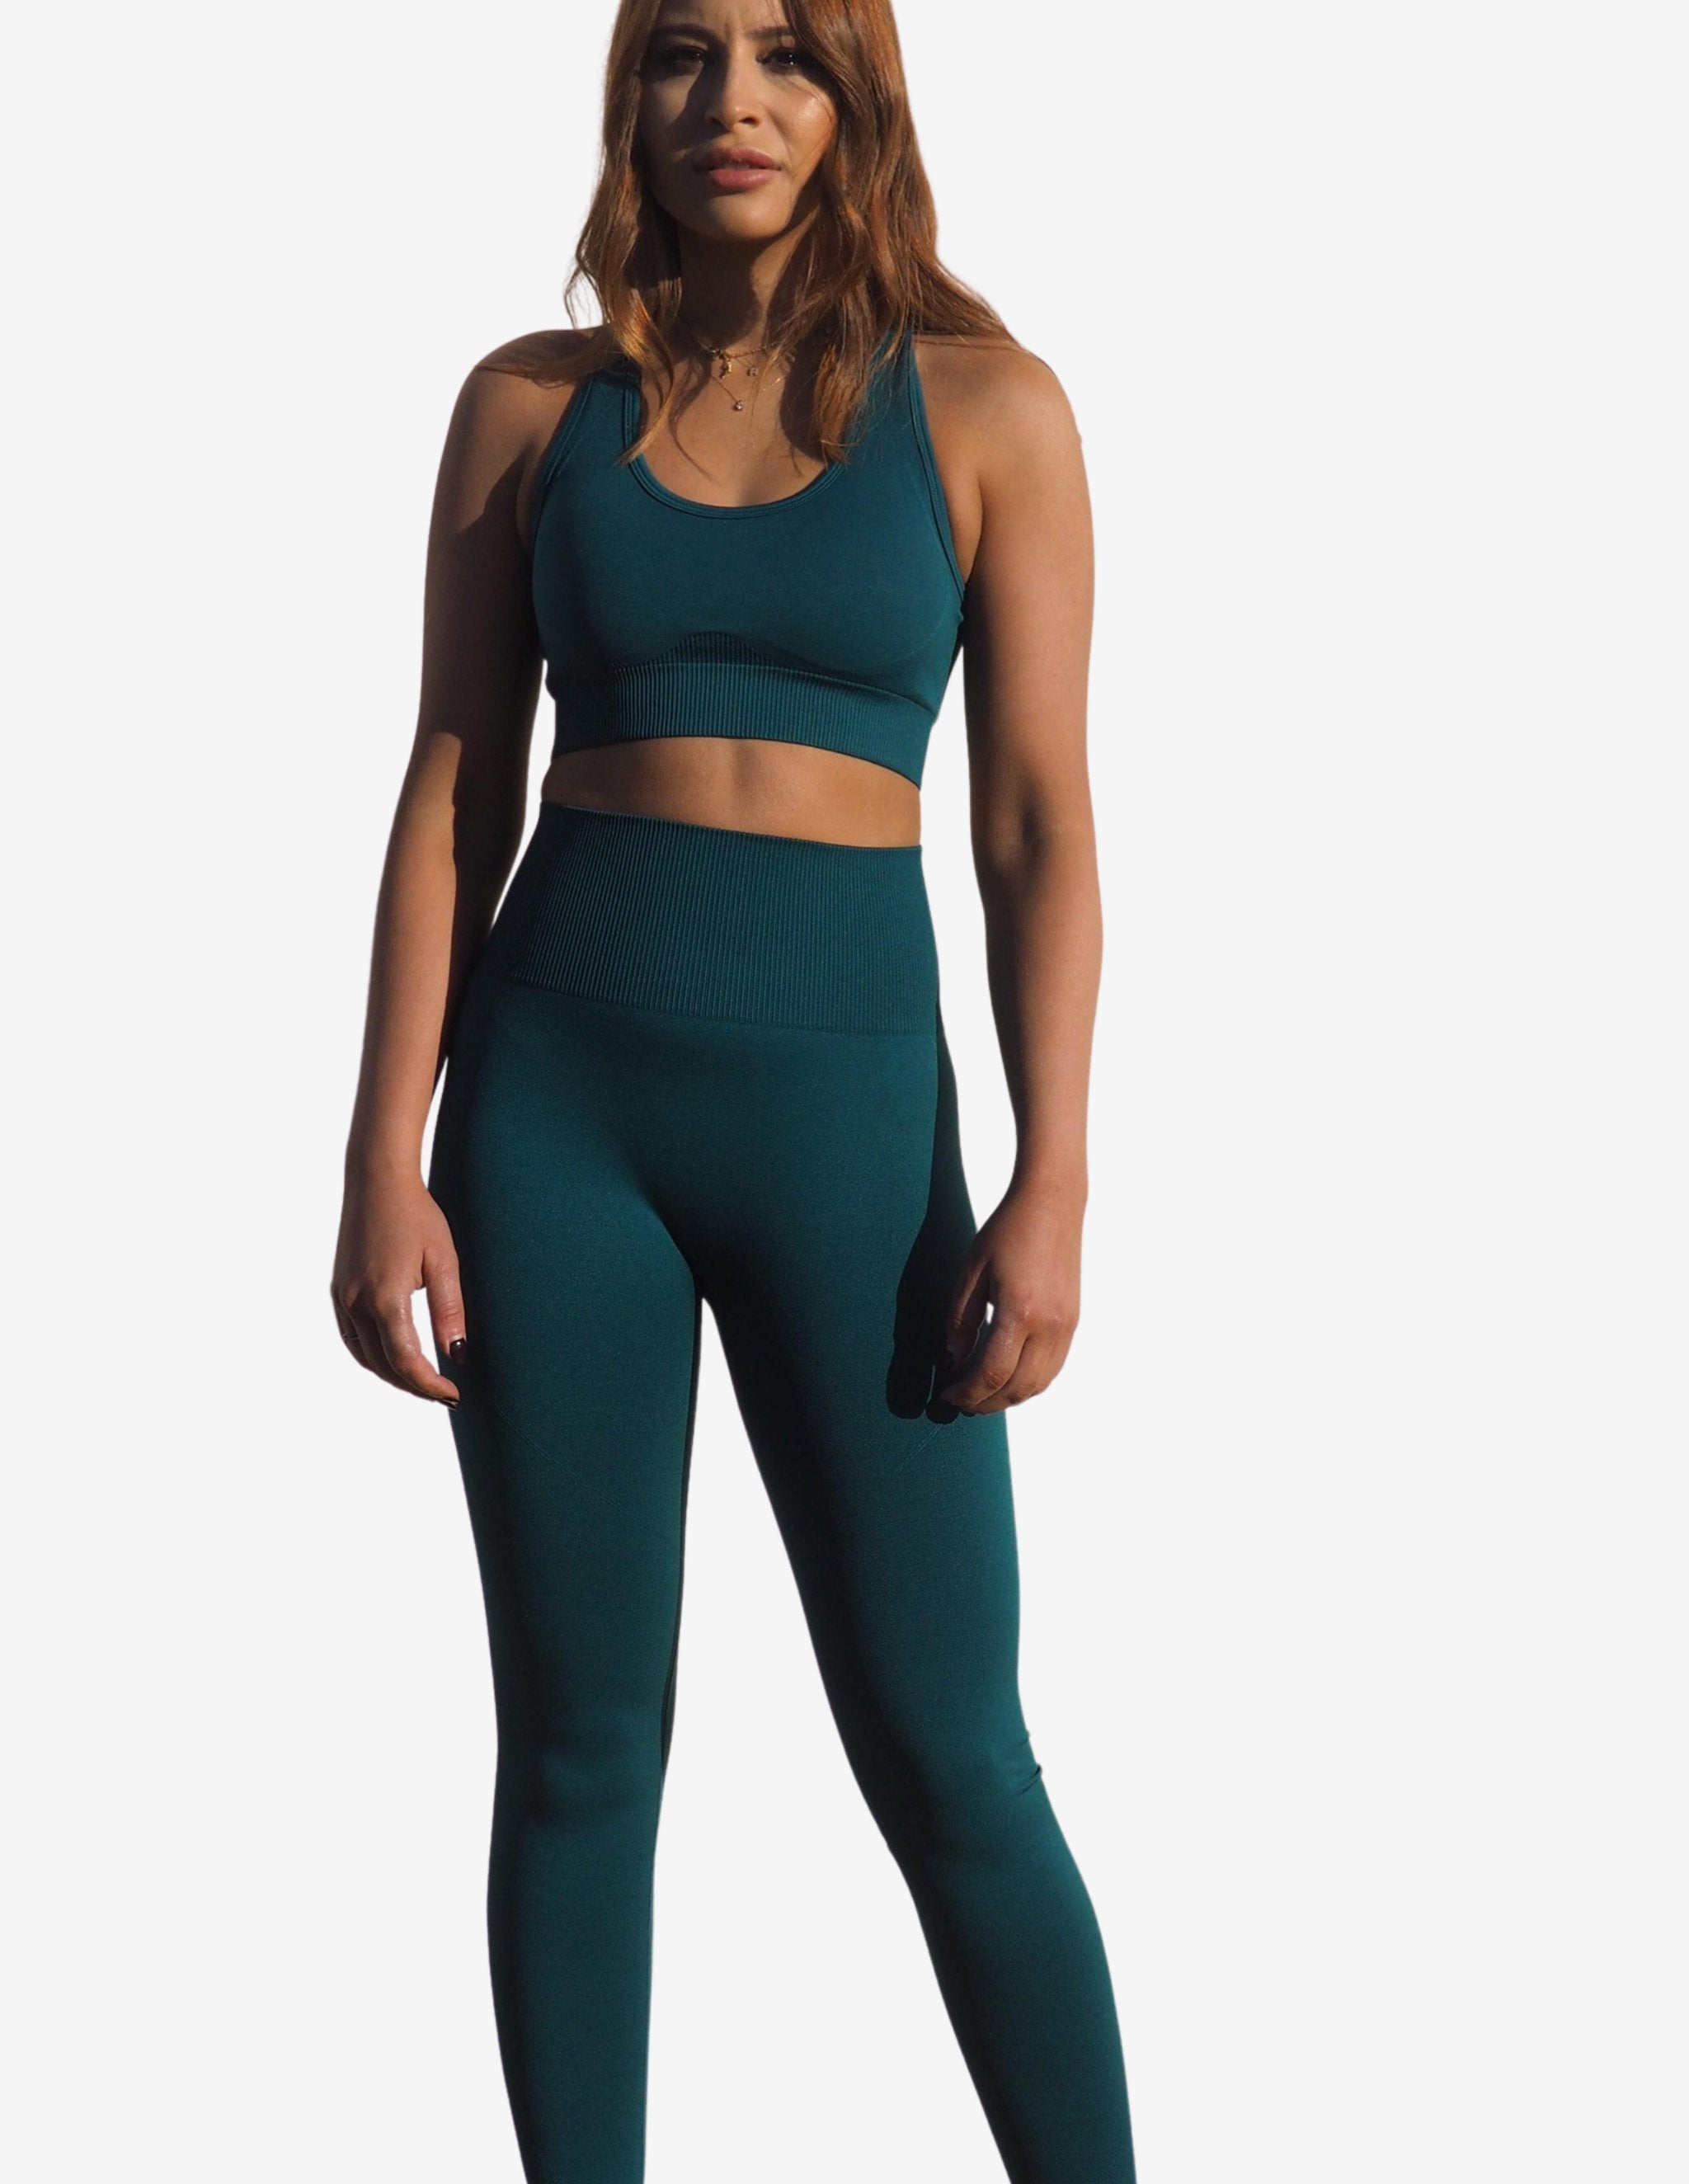 EMERALD SEAMLESS KNIT COMPRESSION SET, Gerry Can